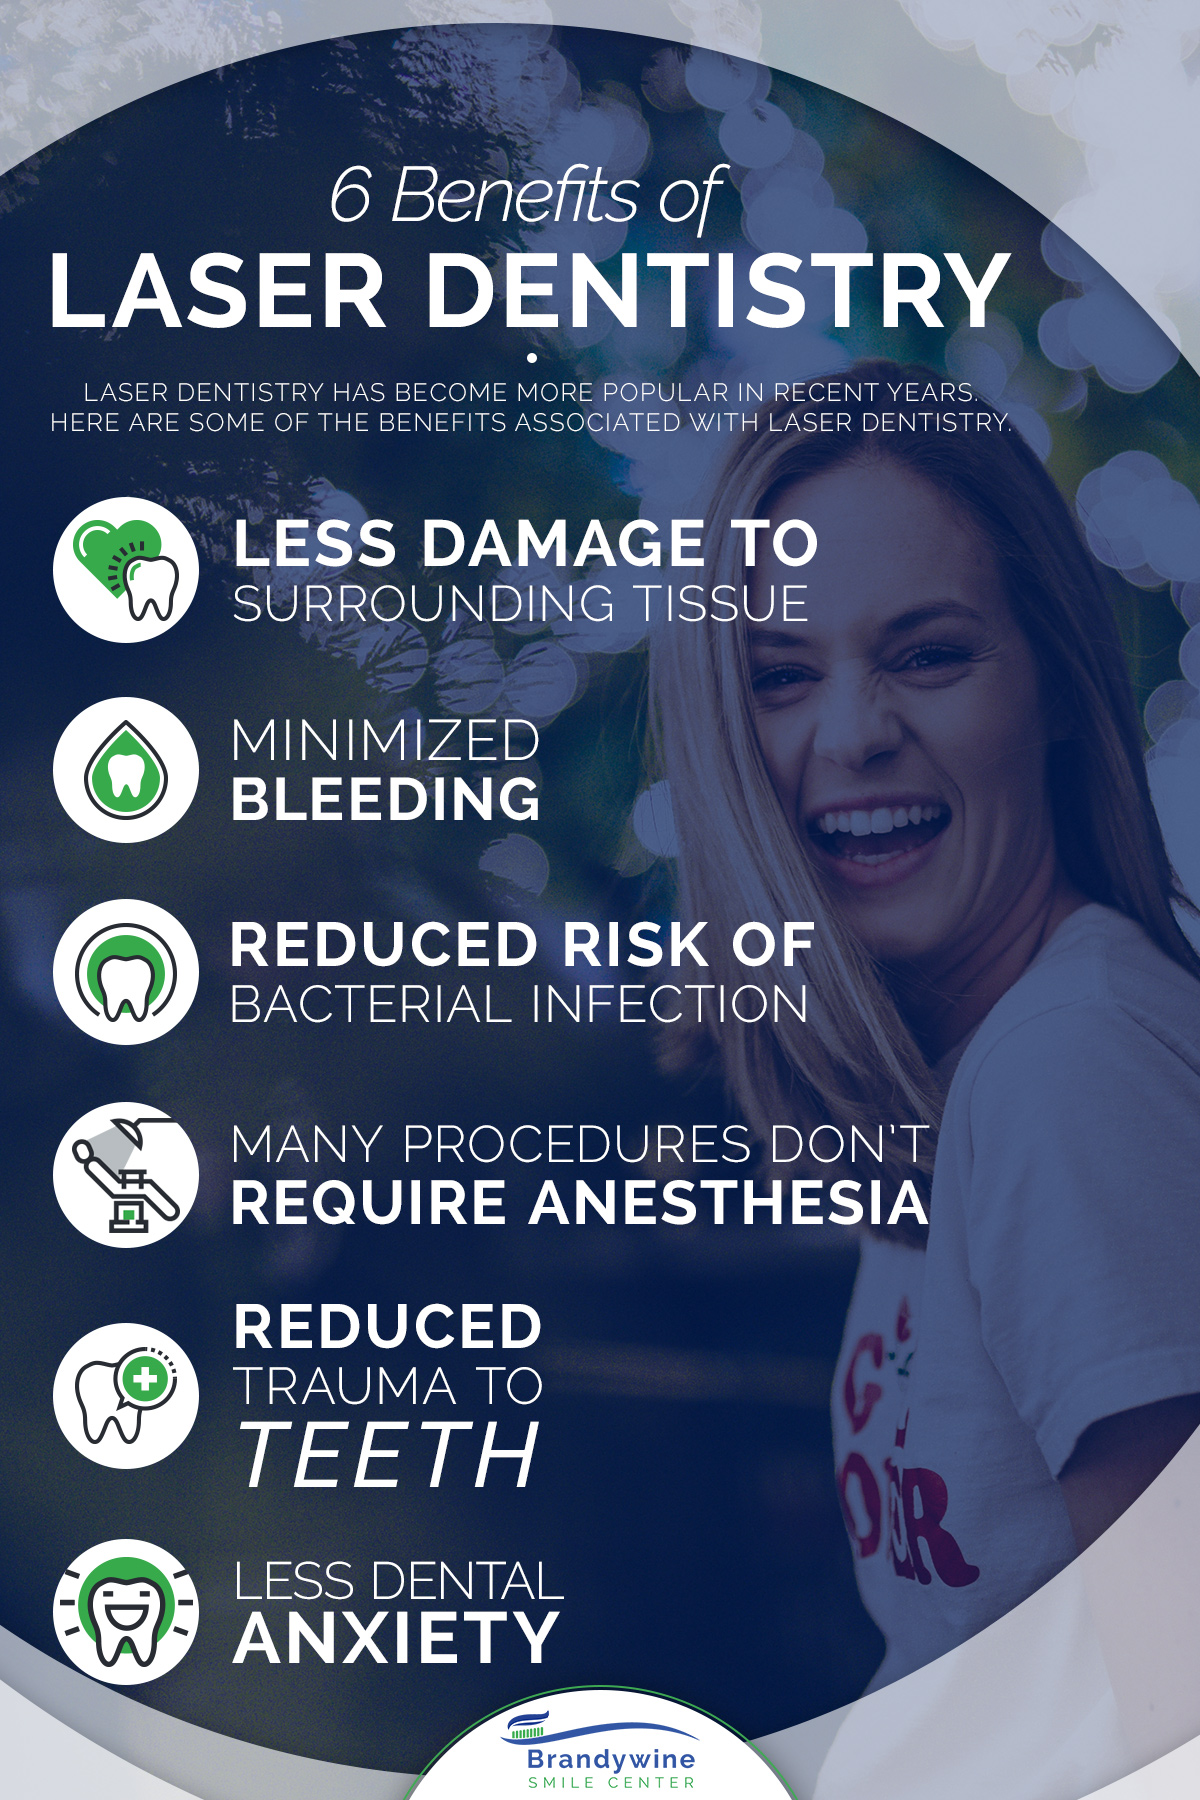 How Laser Dentistry Is Changing the Patient Experience